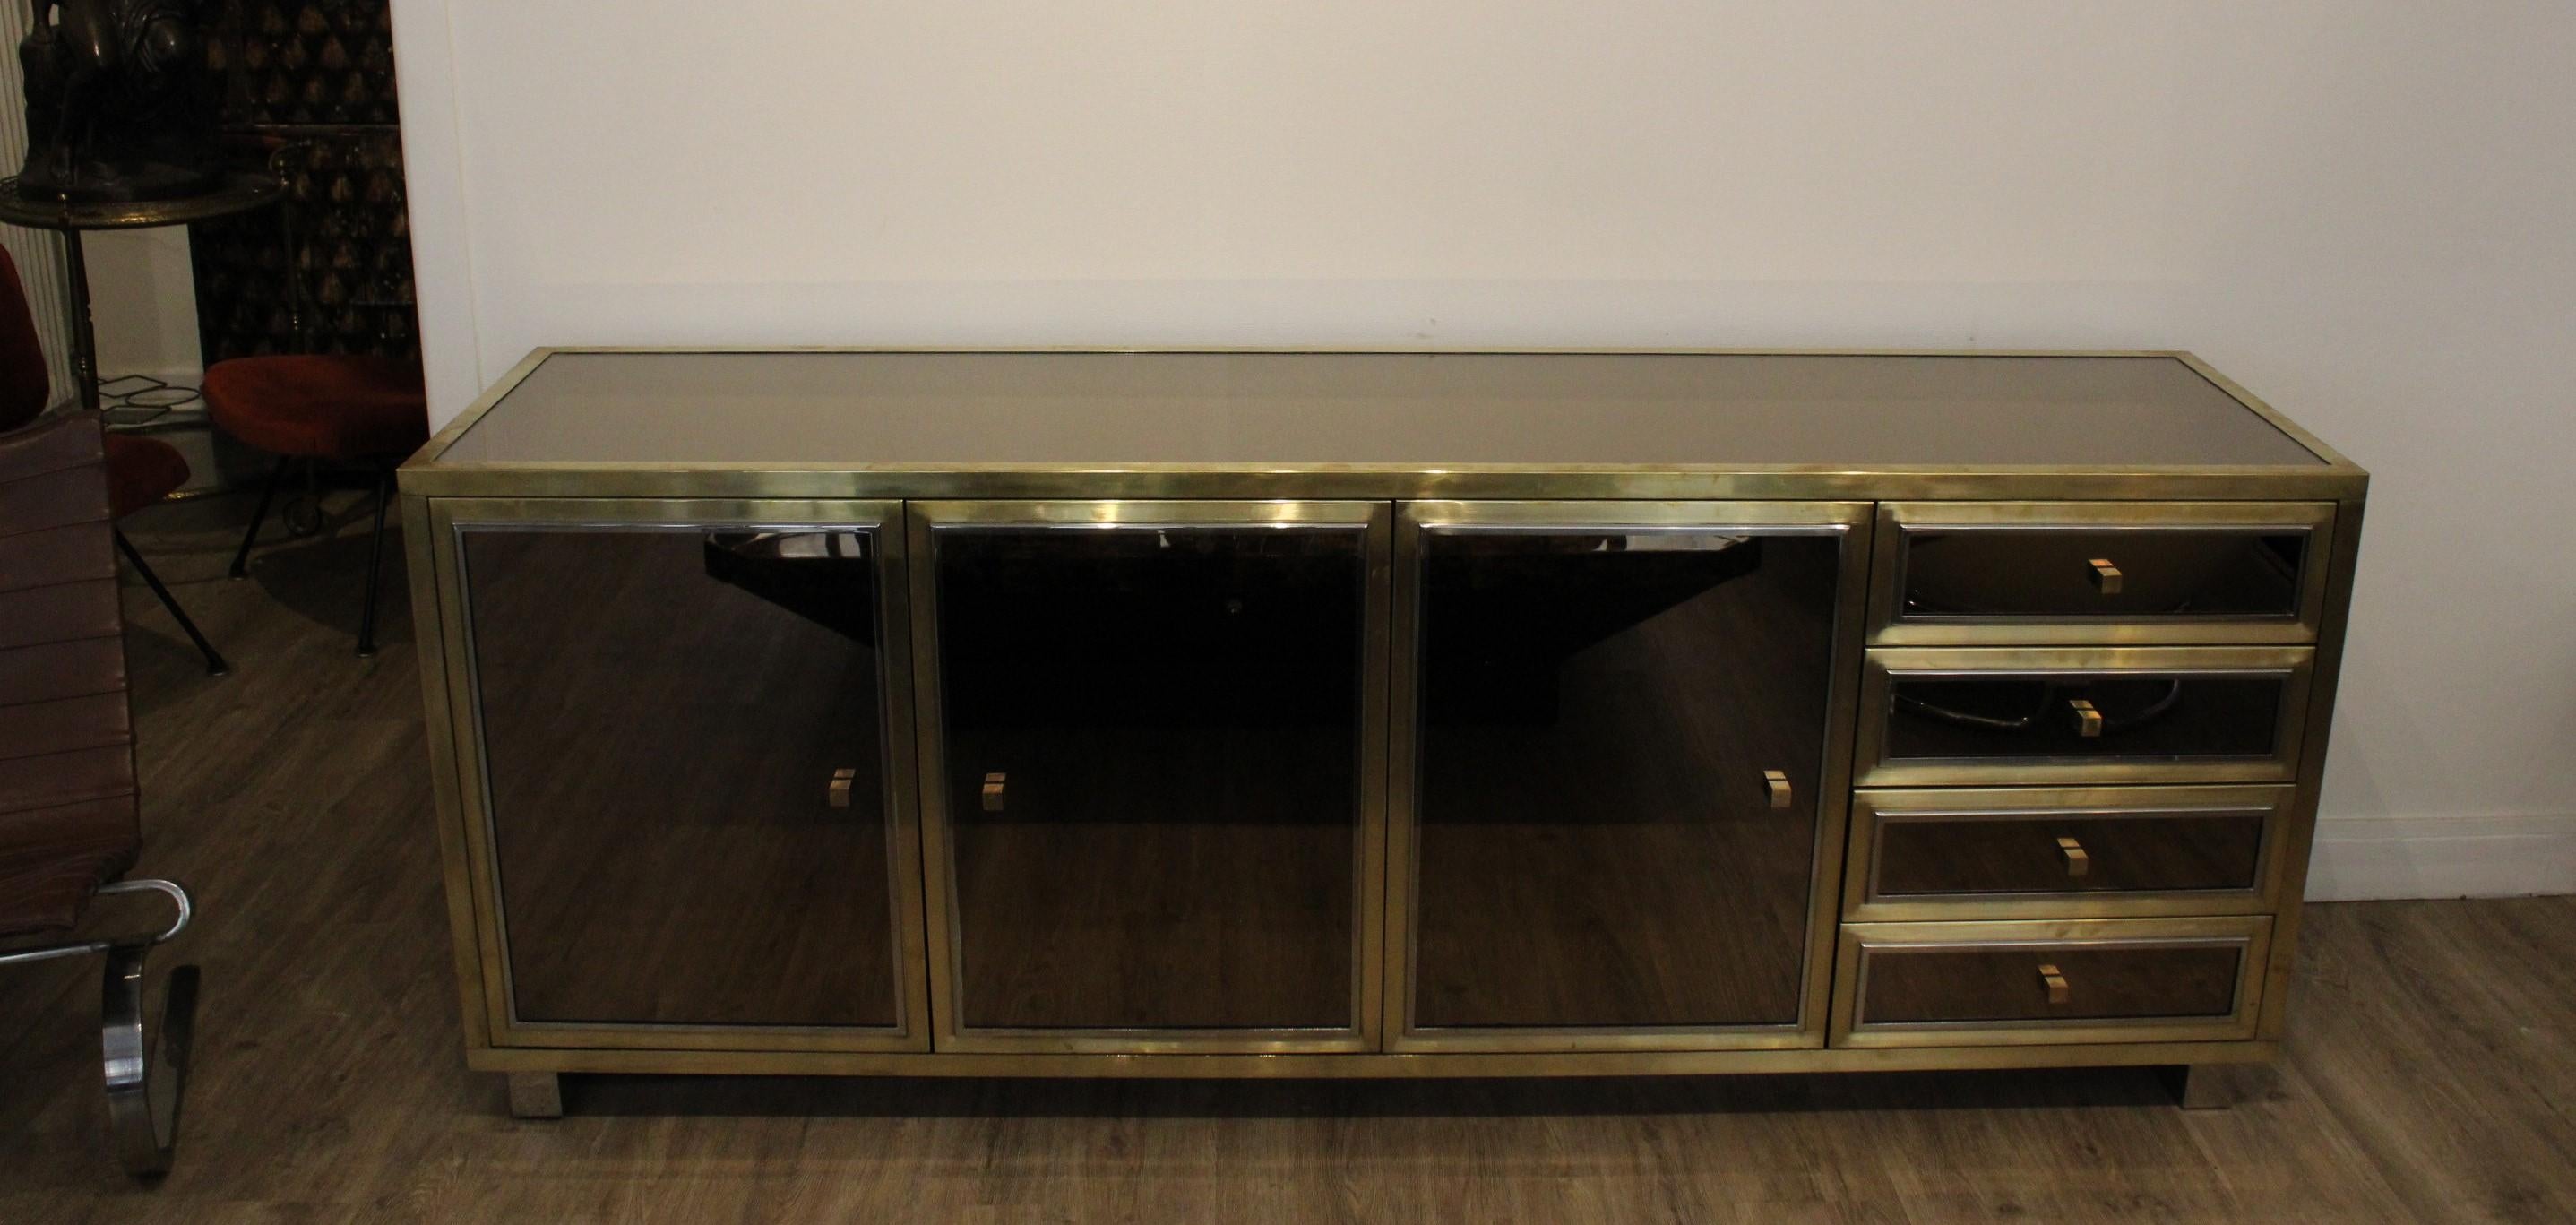 Sideboard in brass and mirror designed by Michel Pigneres. 
With a mirror tray, 3 cabinet doors and 4 drawers (each with mirror inserts)
20th century.

In very good condition, wear consistent with age and use.

Height : 76.5cm 
Width : 200